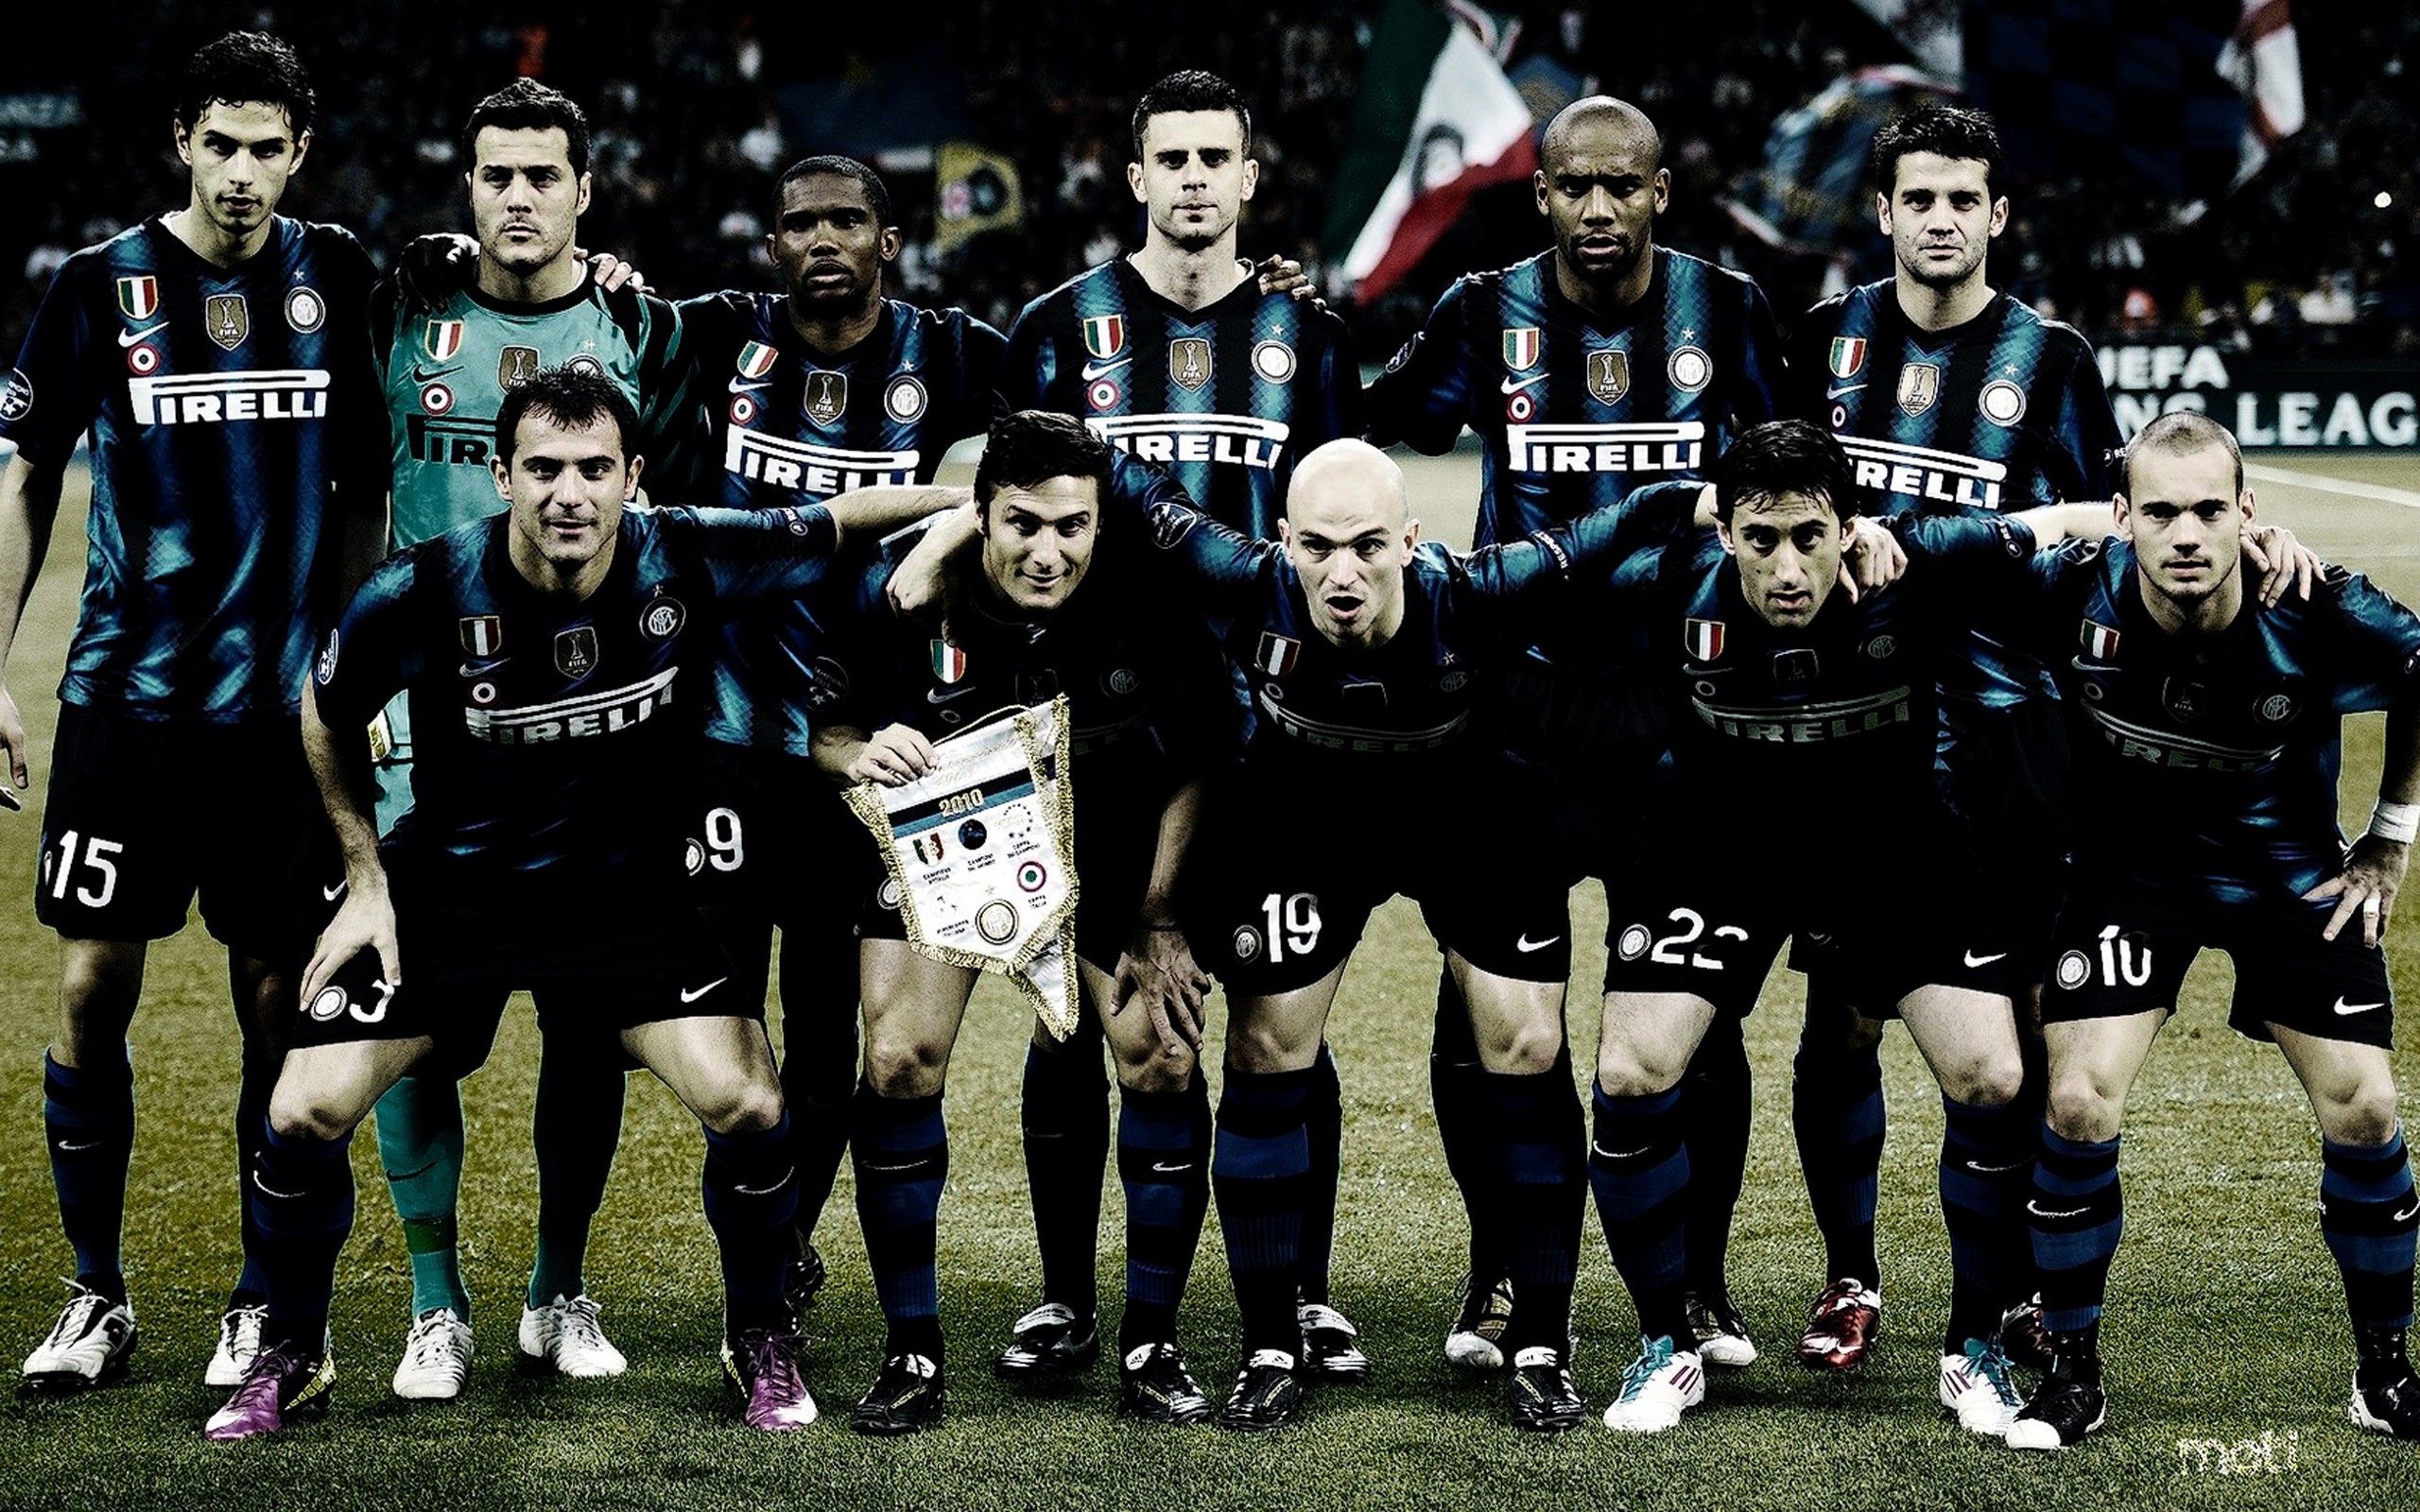 Inter Milan Football Club Players on Ground Images | HD Wallpapers